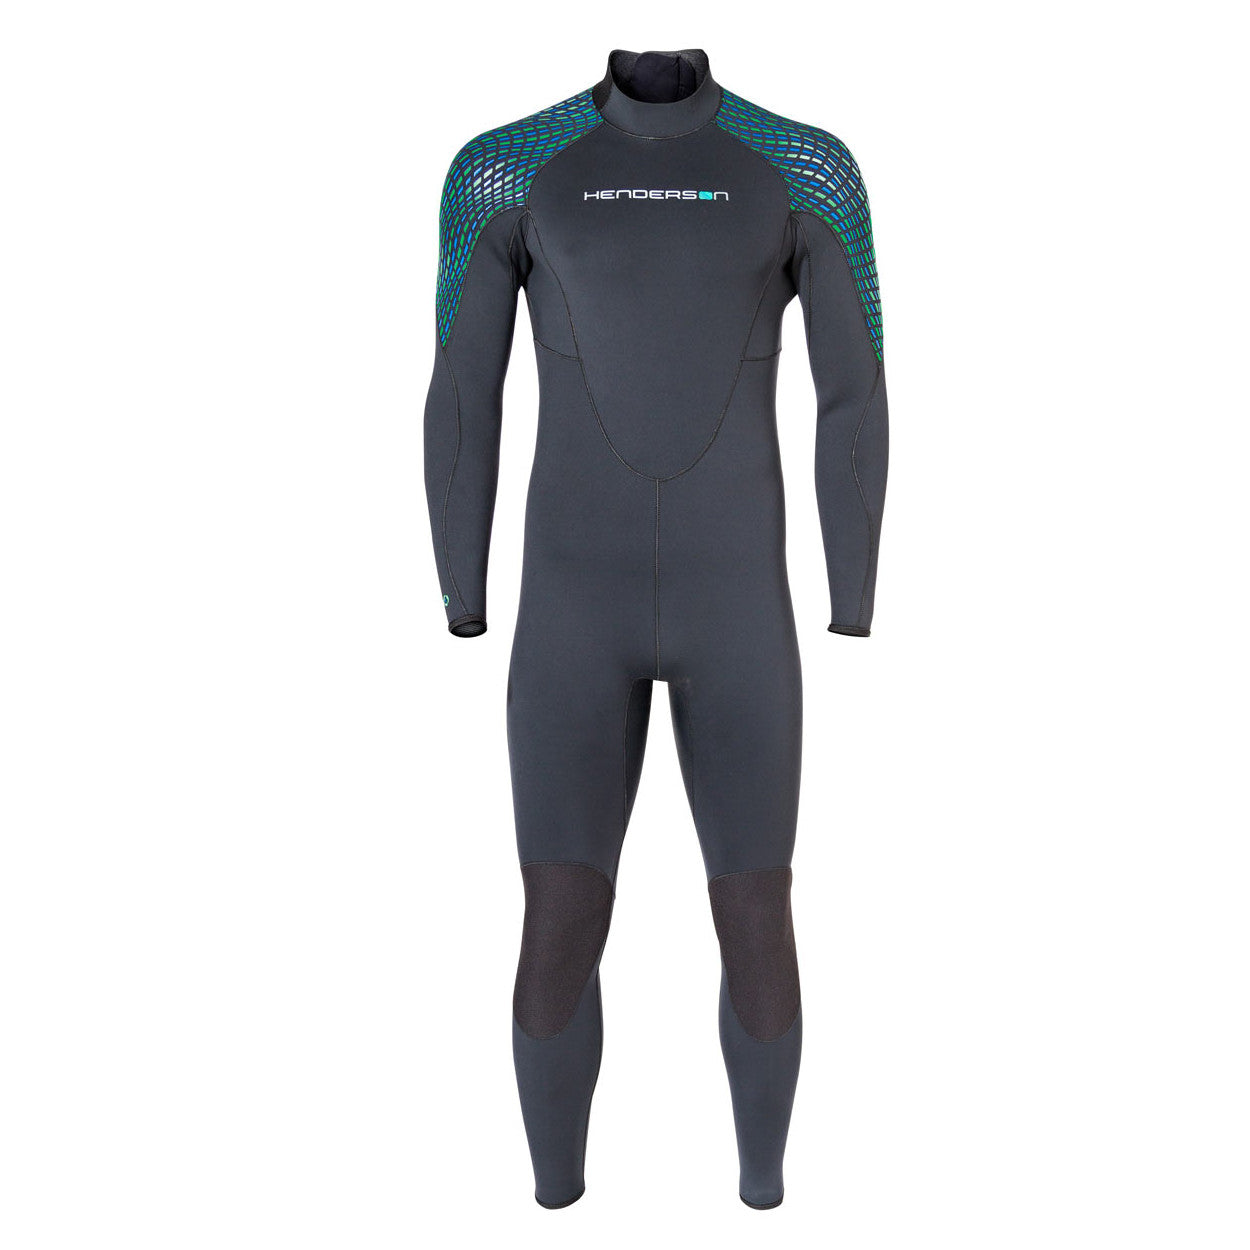 How to Choose a Wetsuit